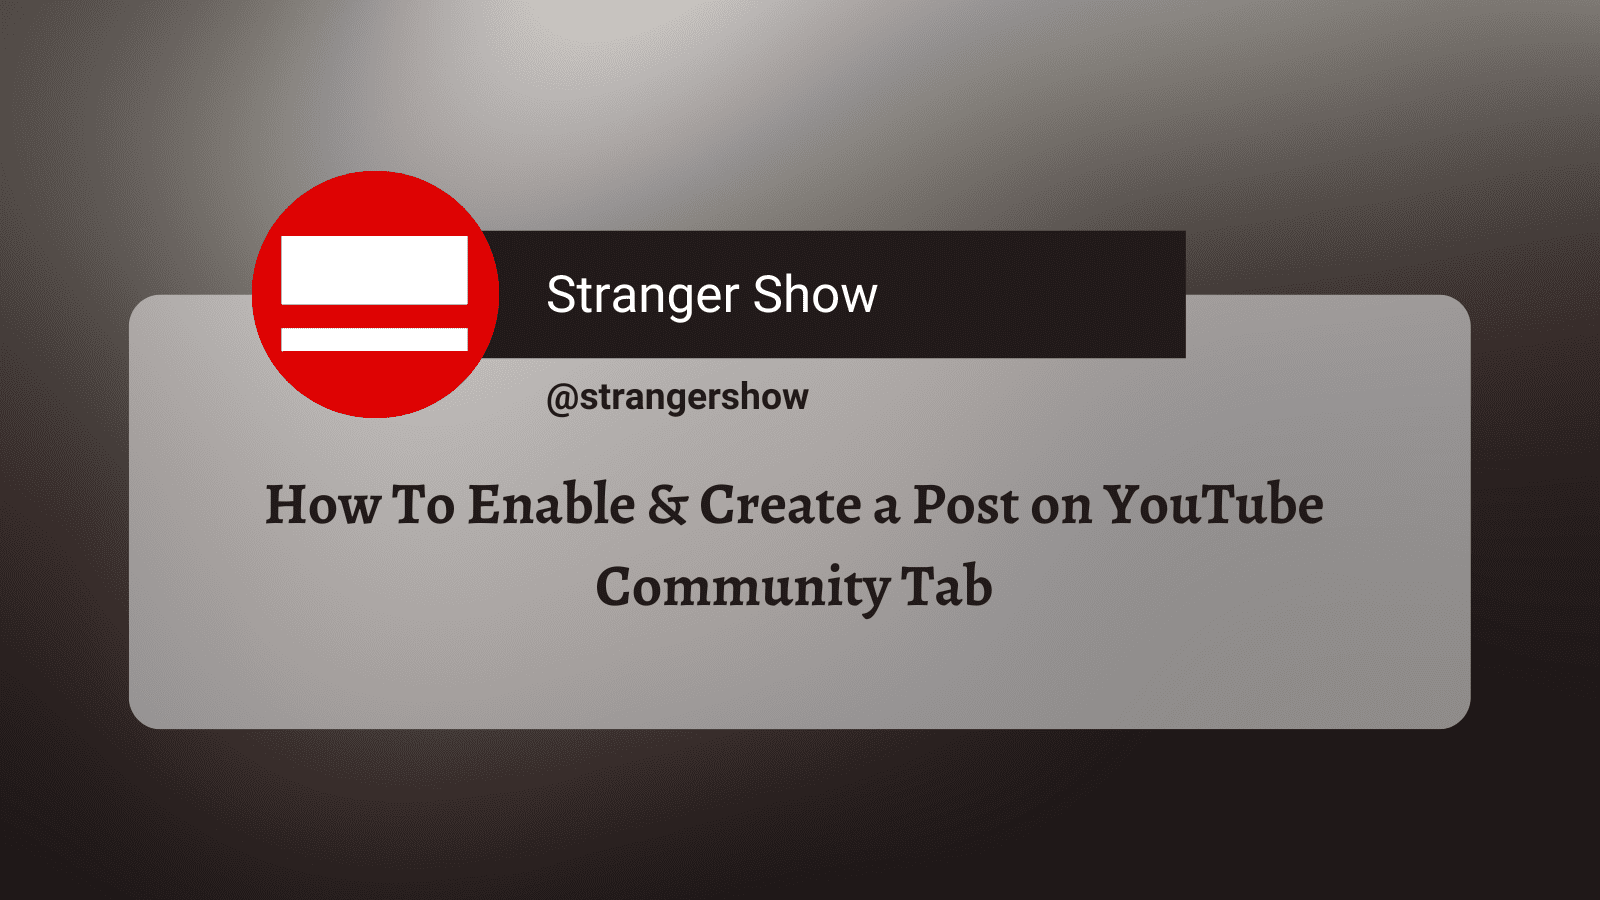 How to enable and create post on YouTube community tab